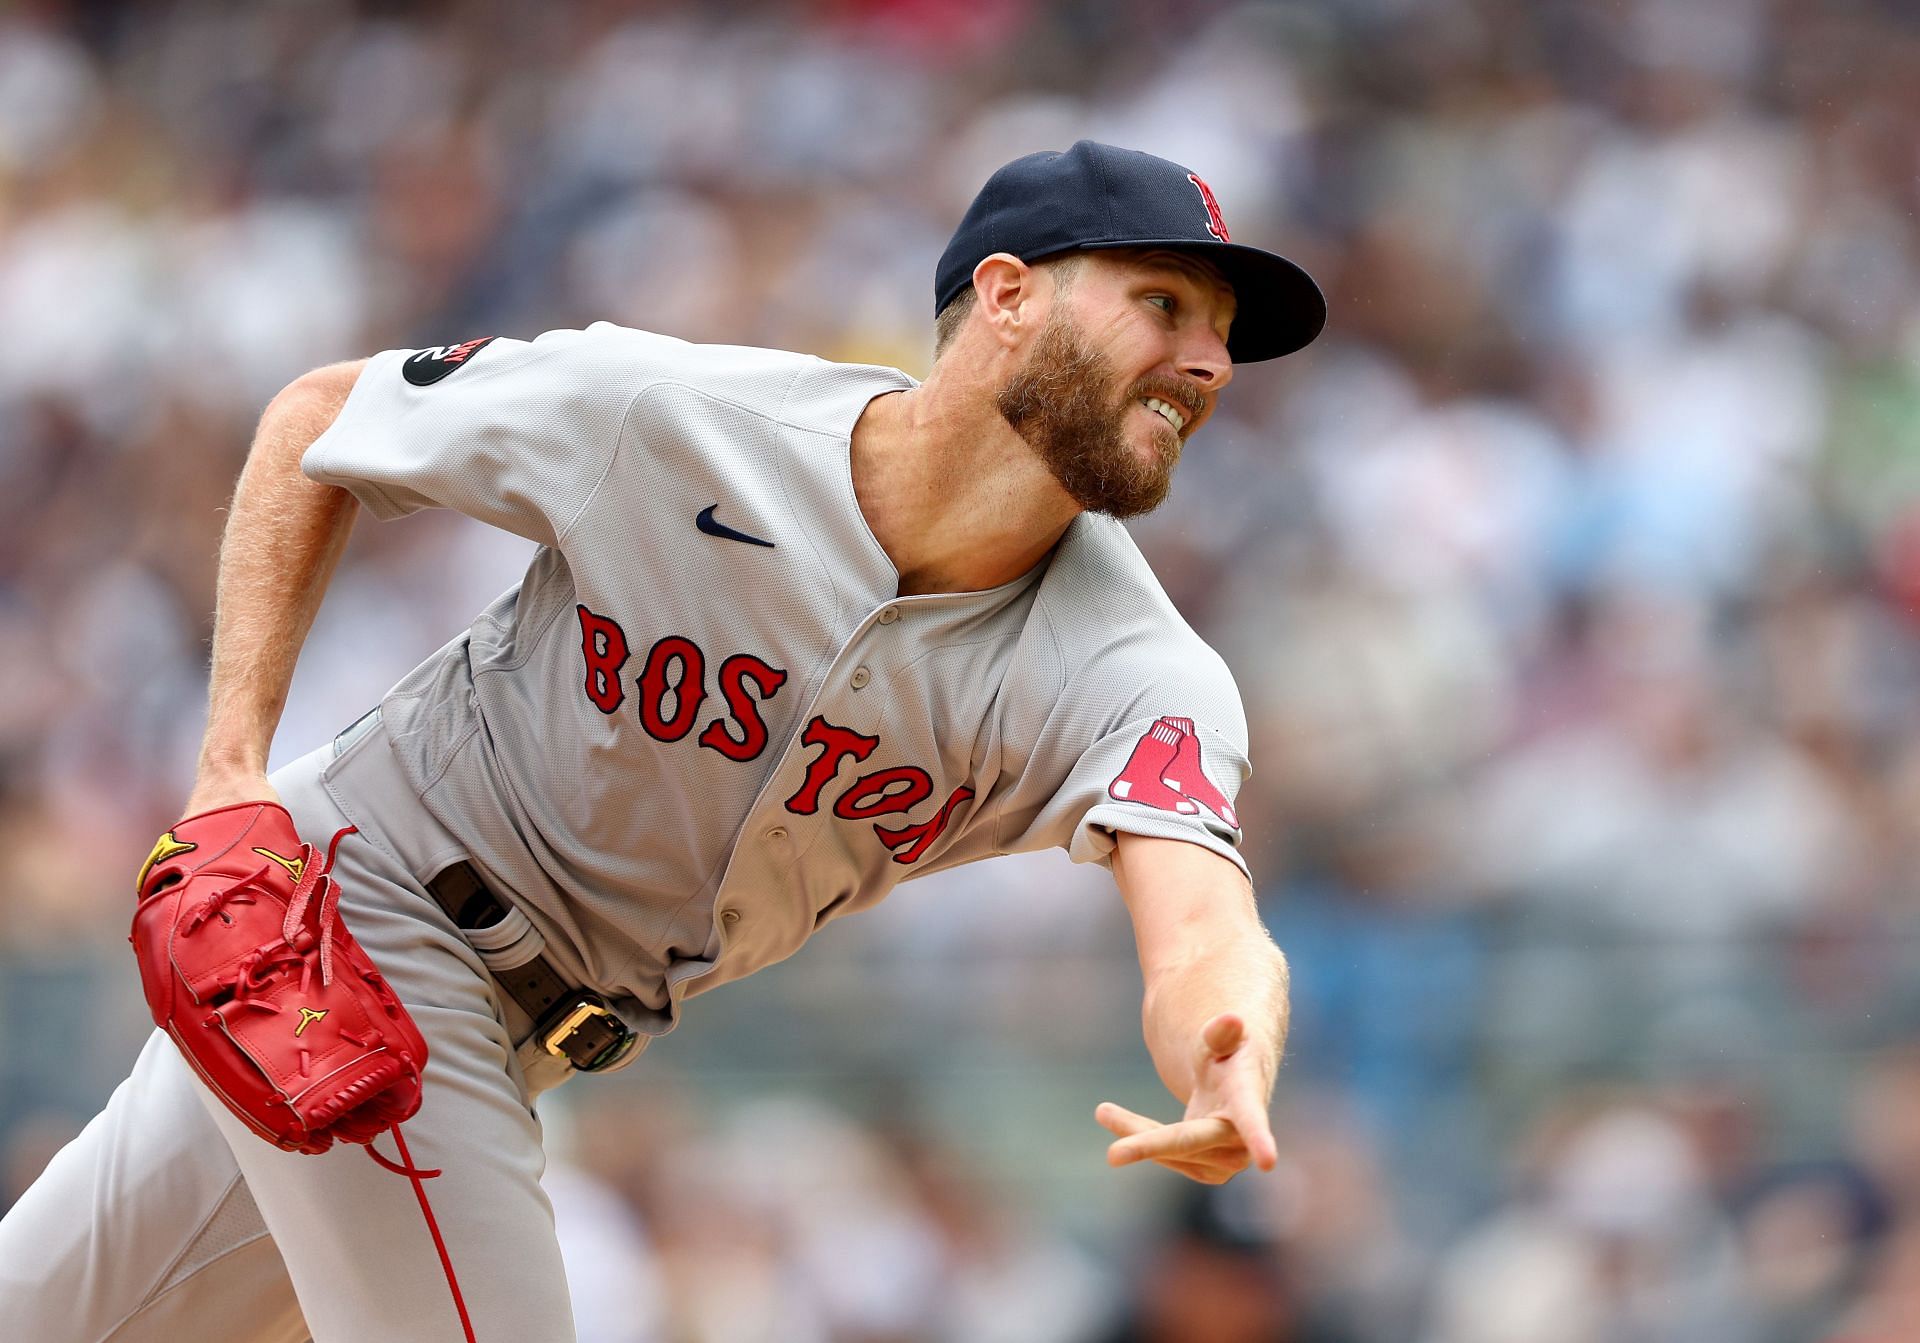 Boston Red Sox - Wednesday night's #RedSox starters